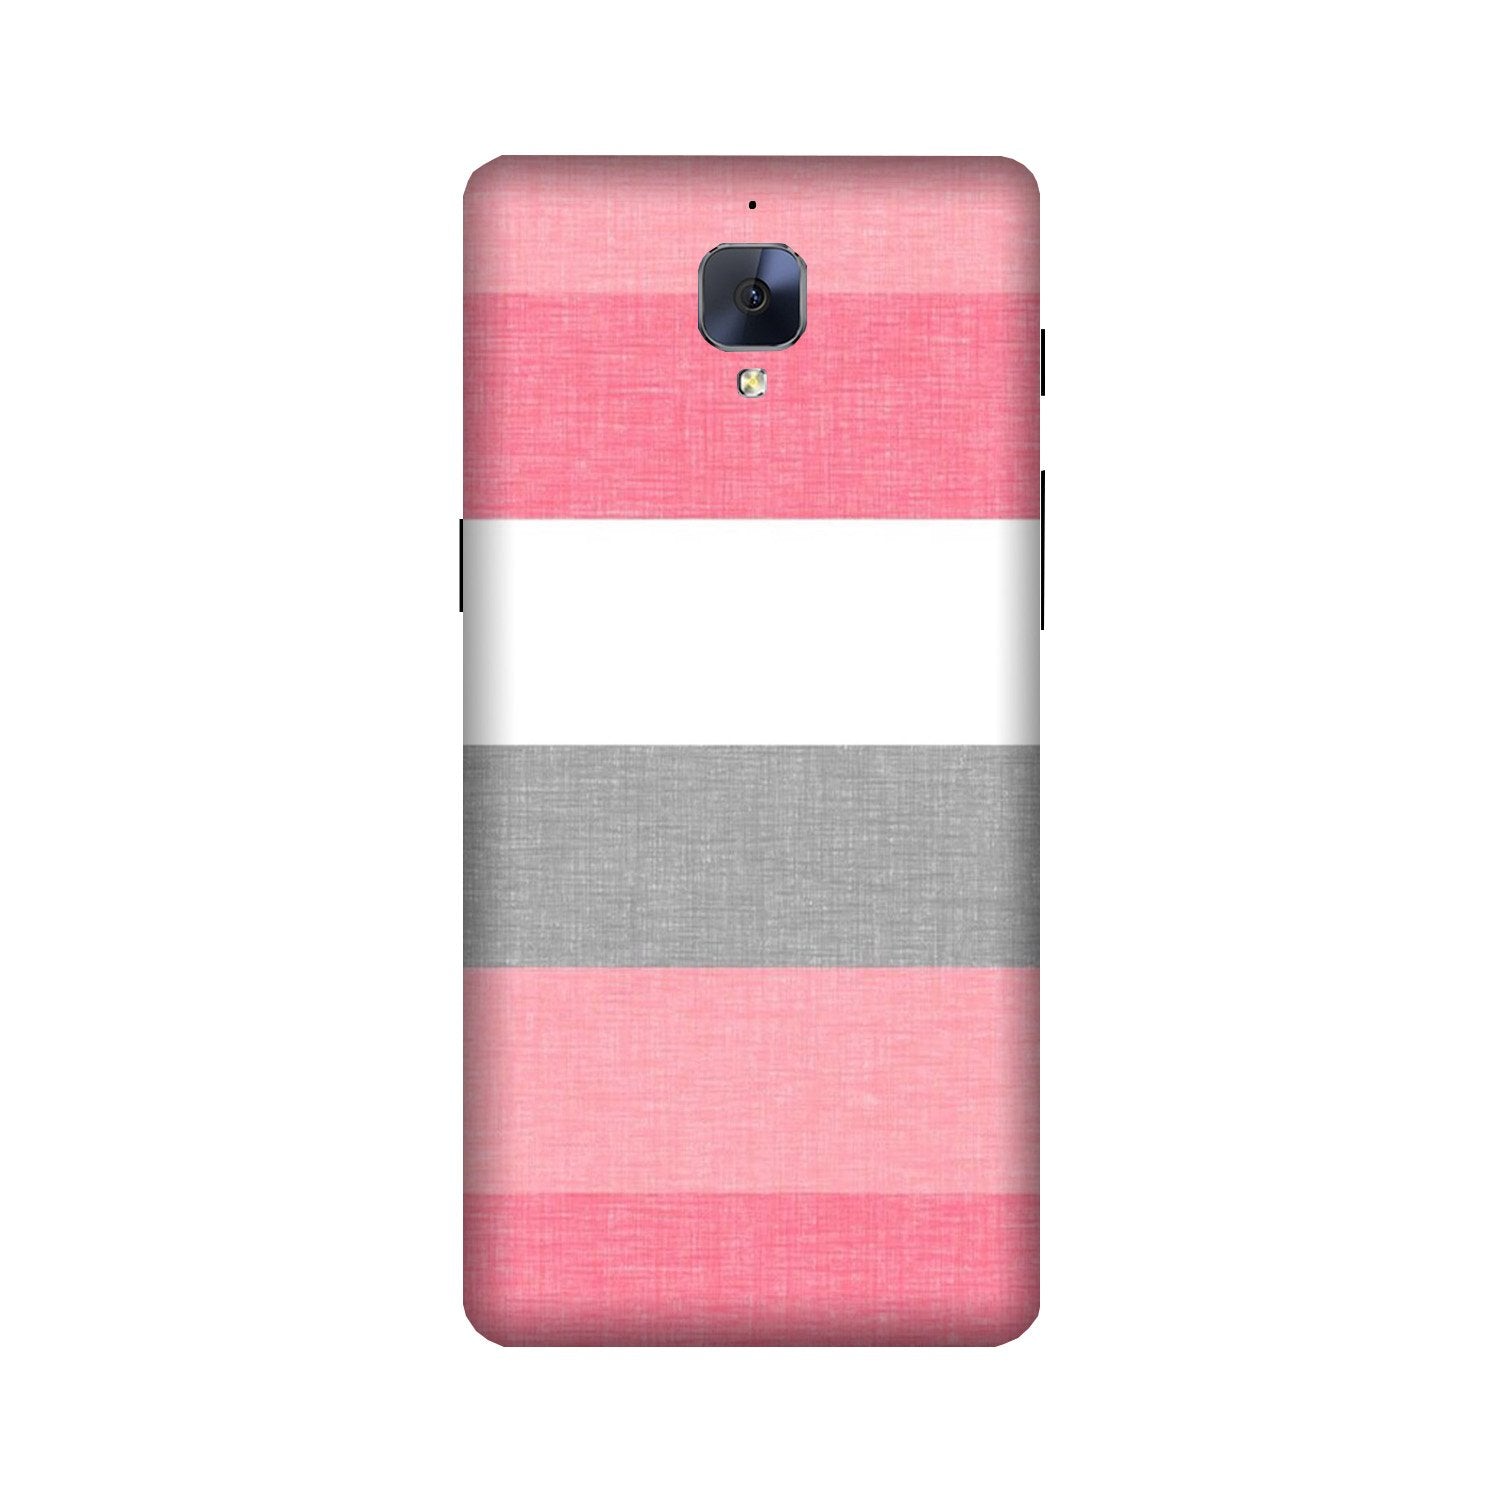 Pink white pattern Case for OnePlus 3/ 3T